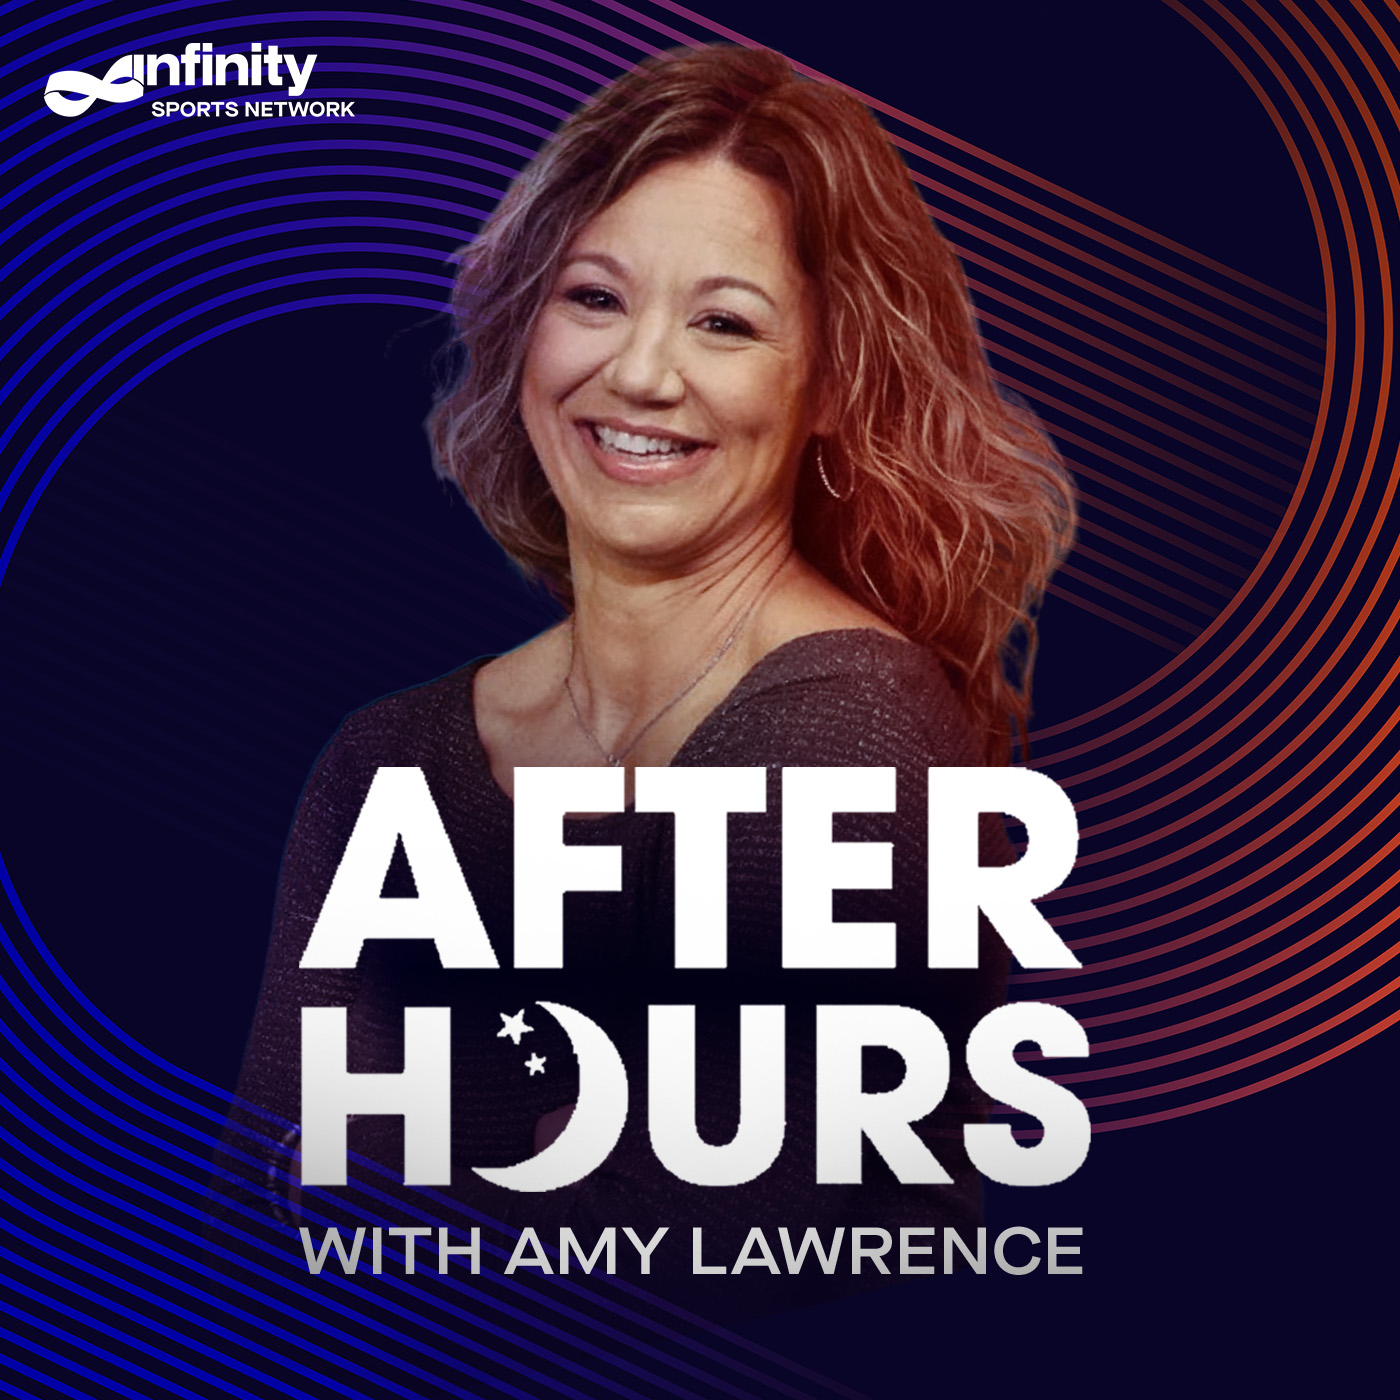 7/6/20 After Hours with Amy Lawrence PODCAST: Hour 1